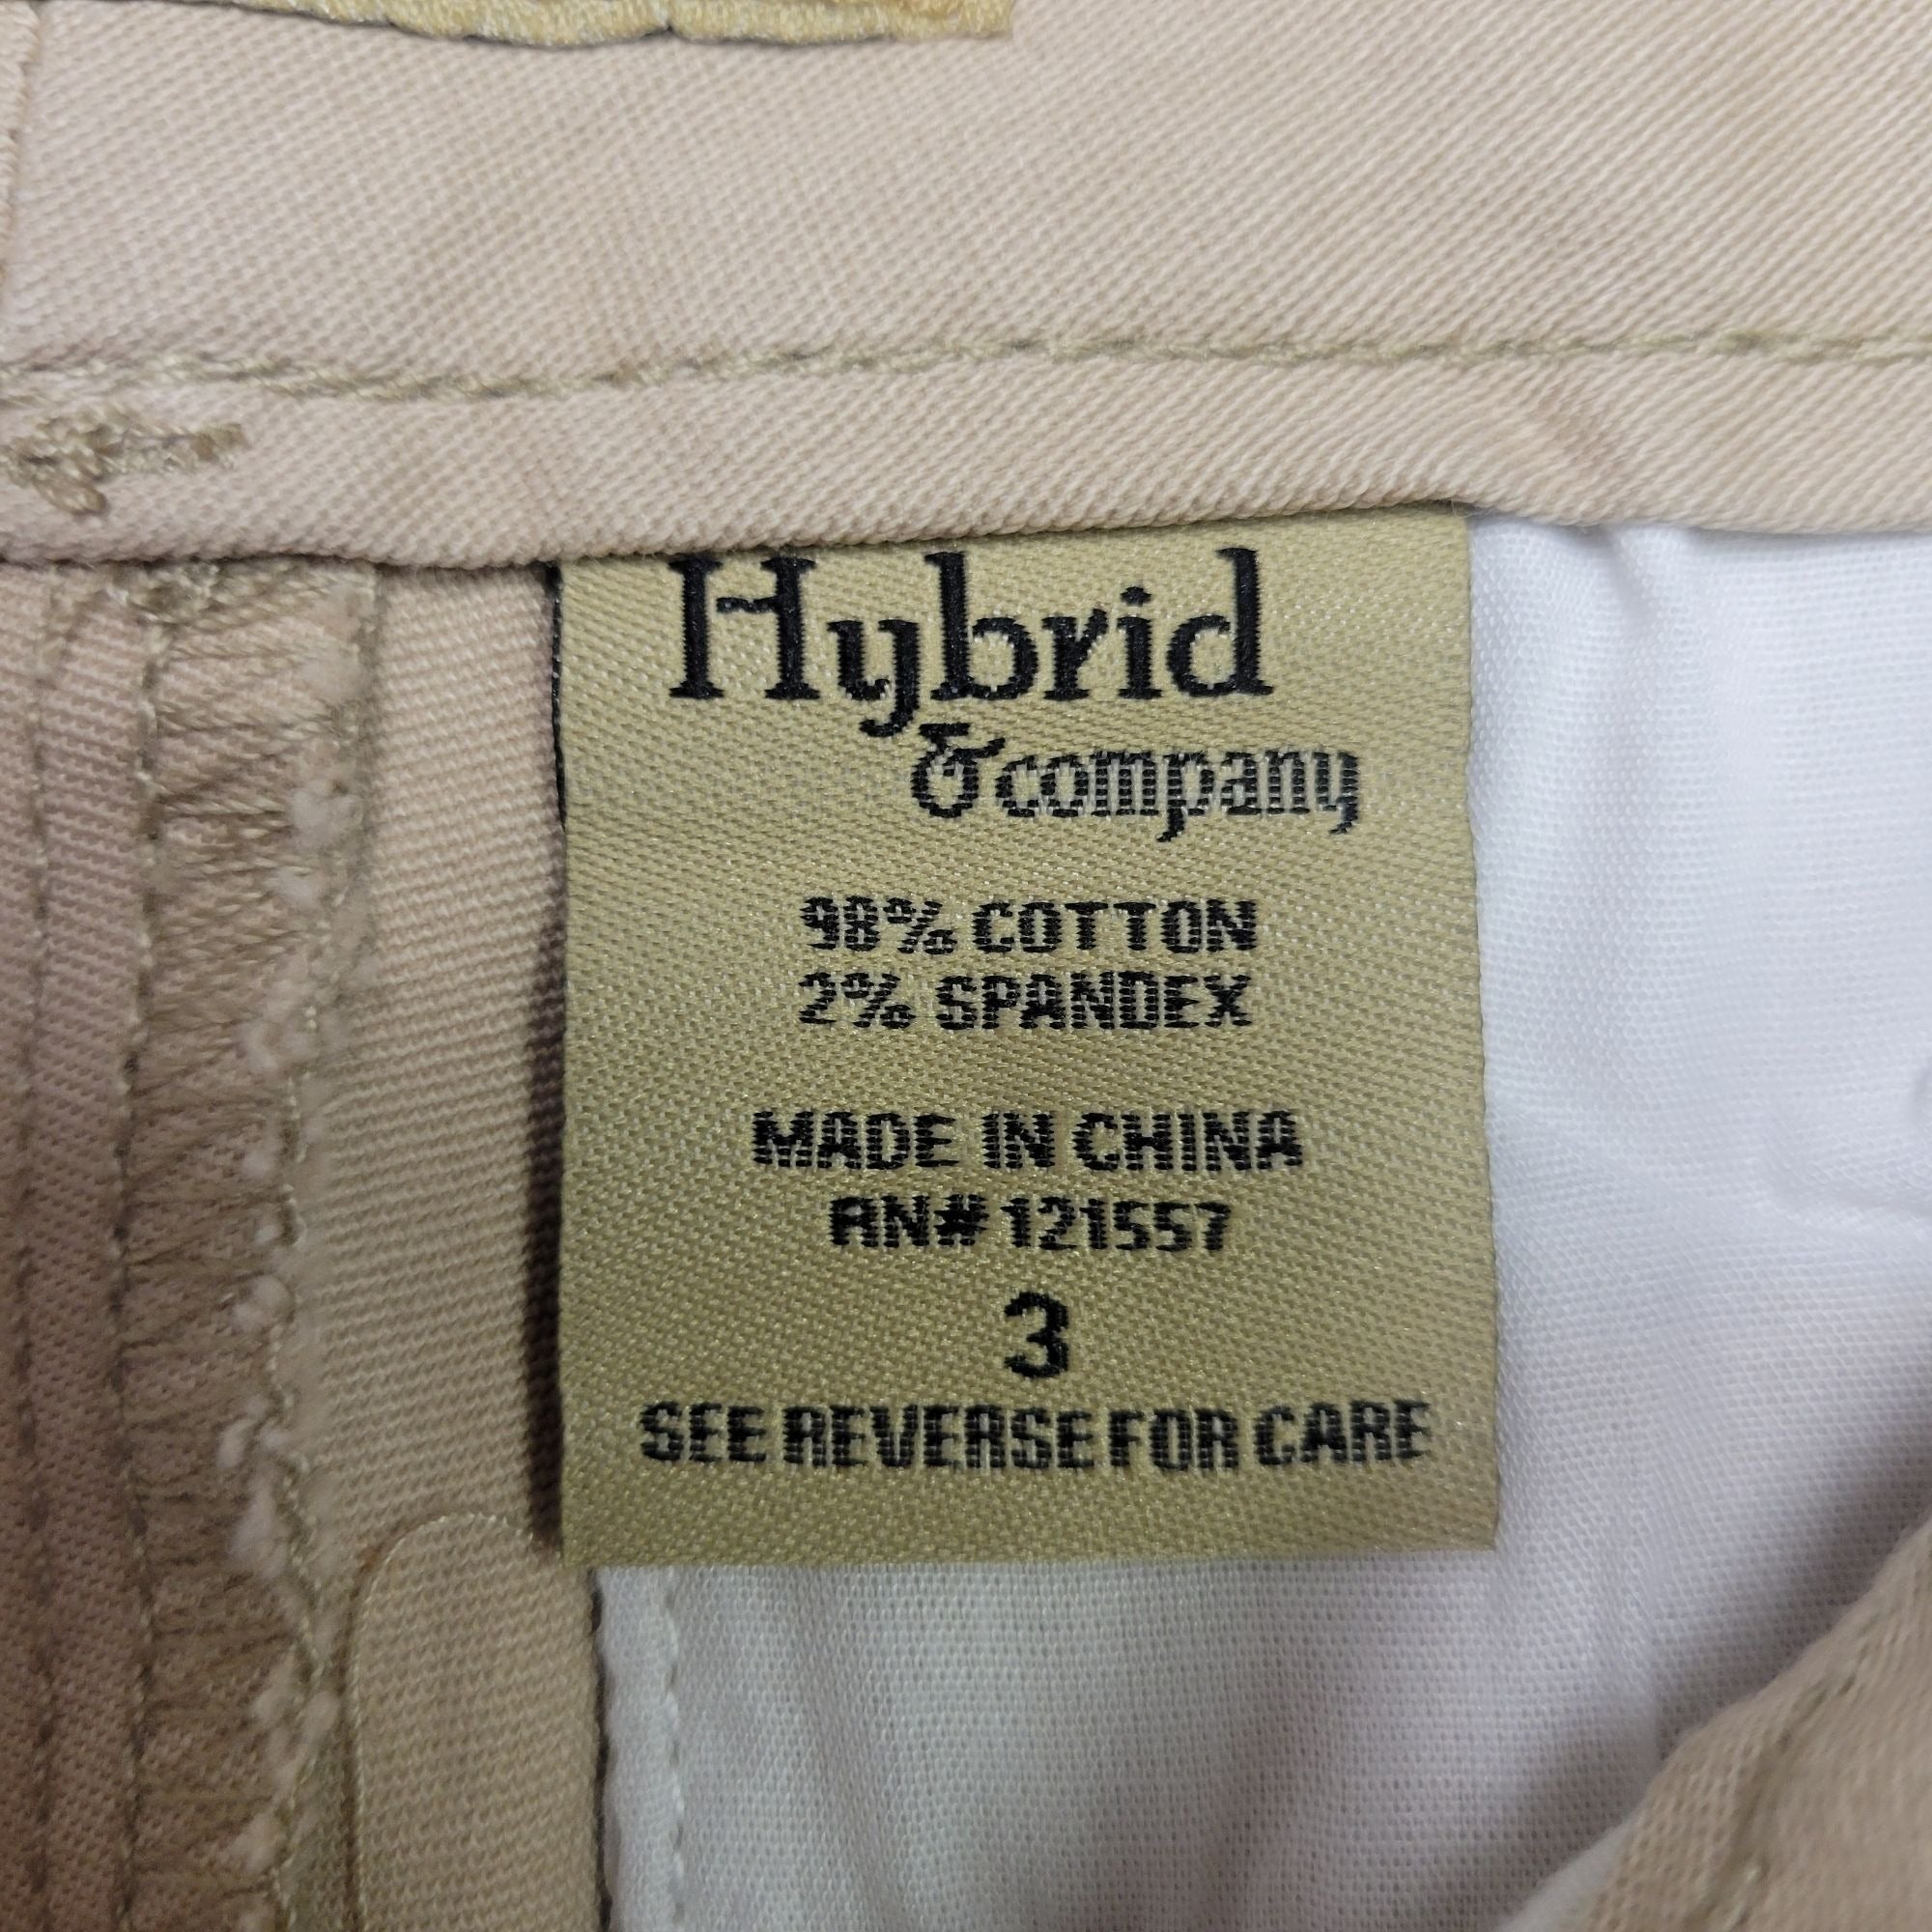 Hybird & Company Slimming, Low Waisted, Bermuda Women's Tan Shorts, Size 3